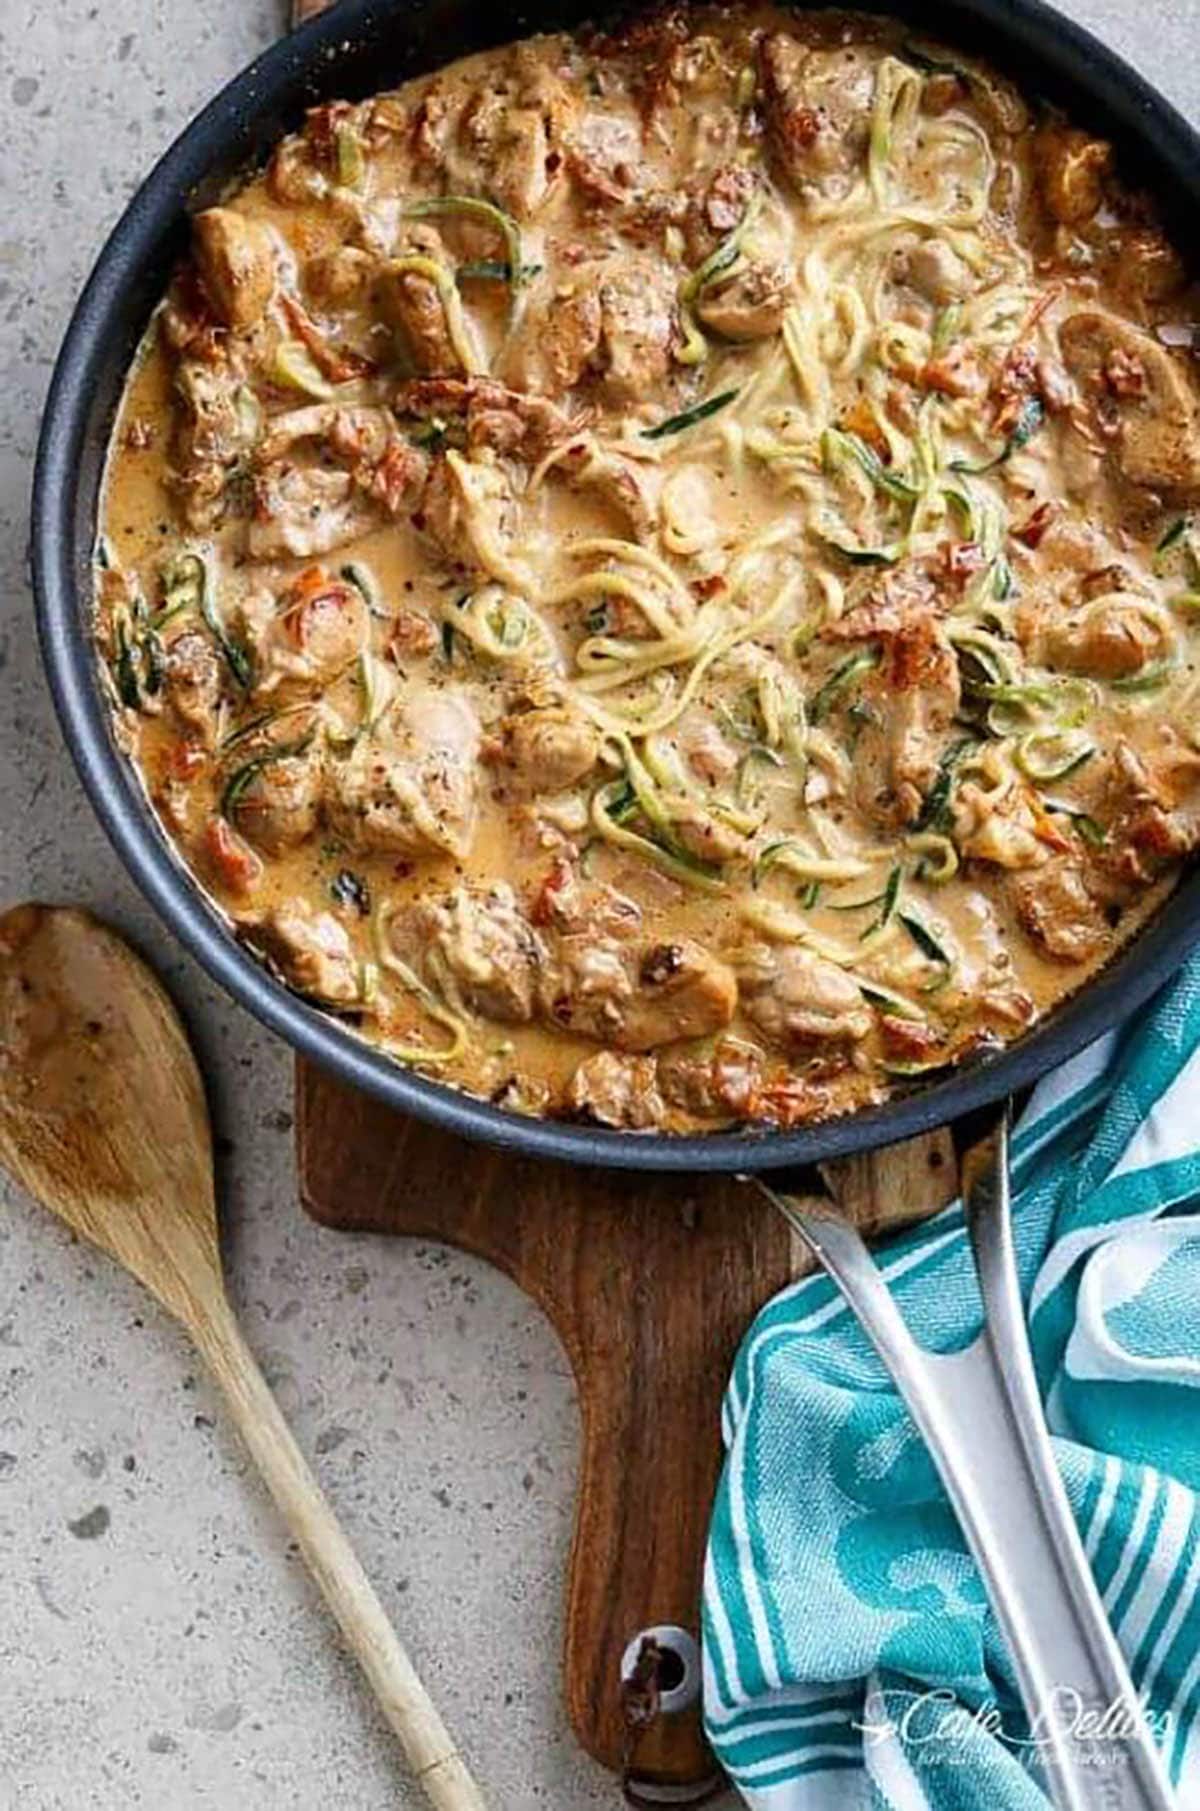 Sun-dried tomatoes and garlic and parmesan cheese infused in a cream based sauce, enveloping crispy, golden pan fried chicken strips and zoodles for the craziest low carb comfort food.